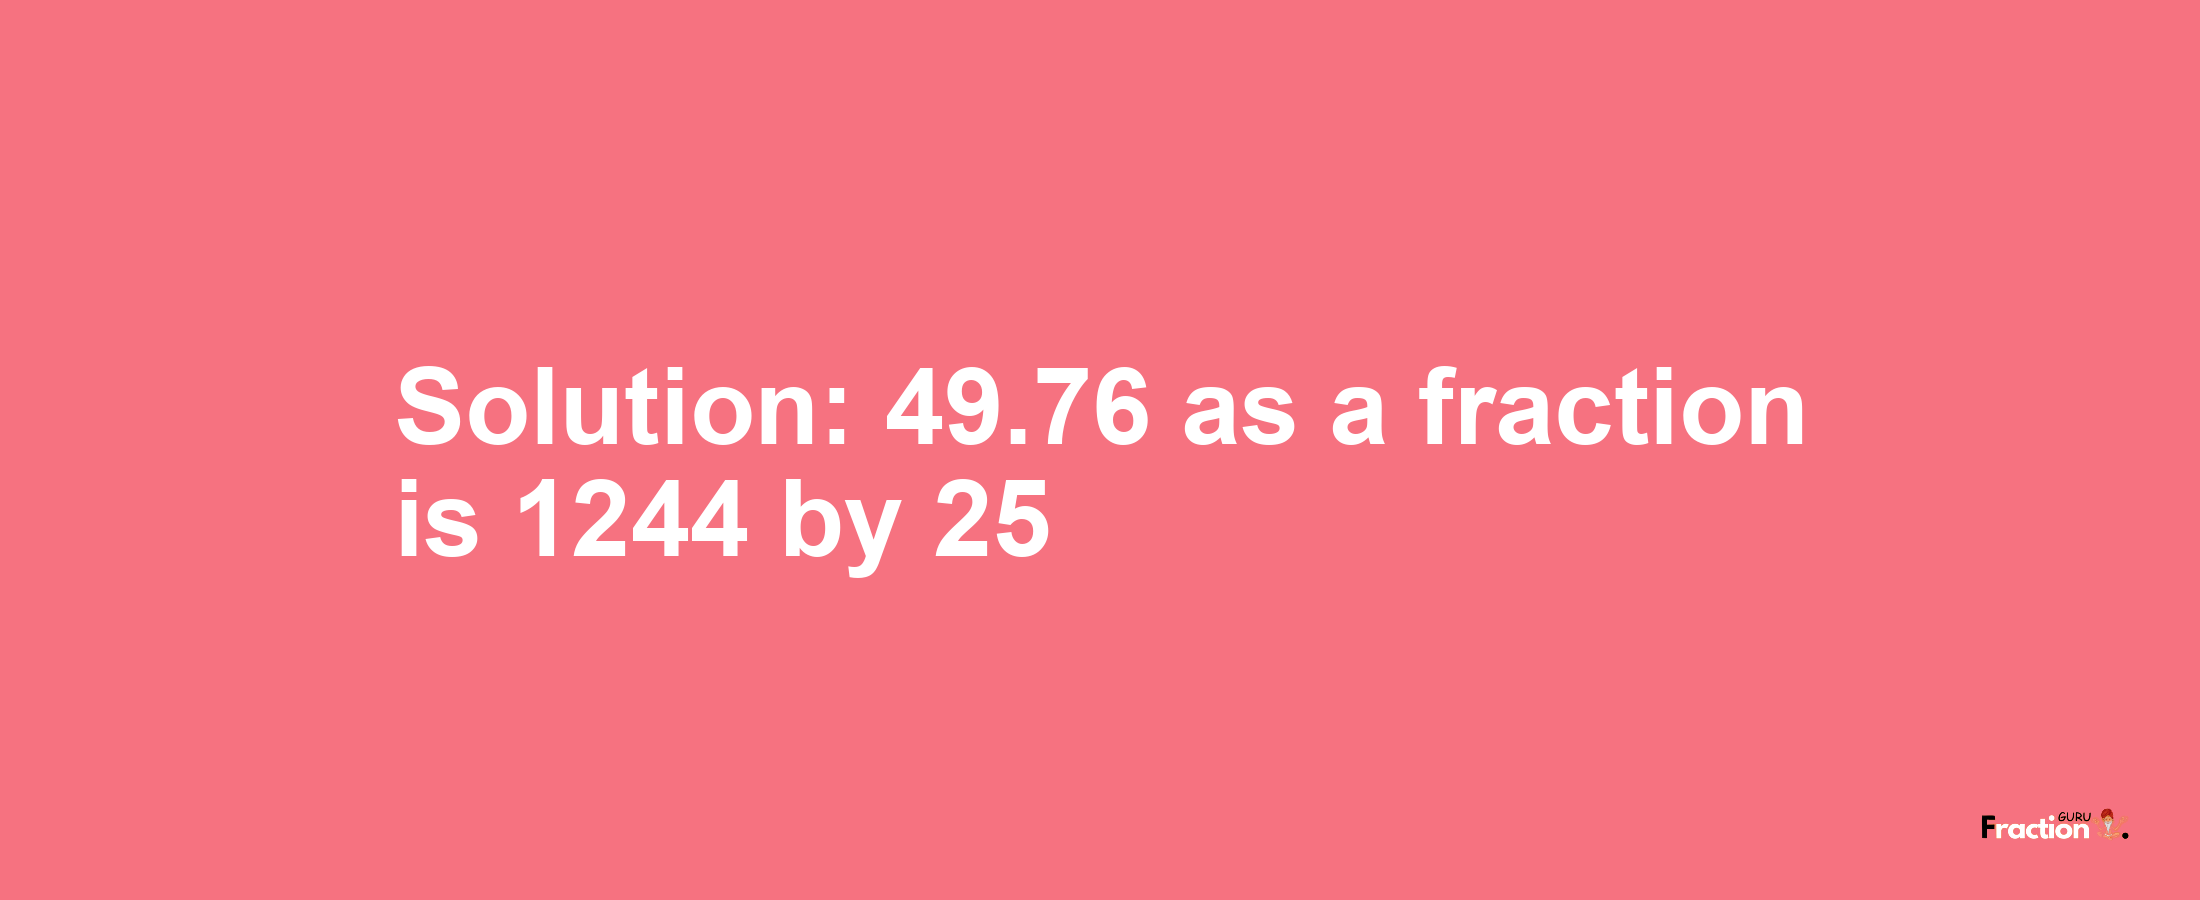 Solution:49.76 as a fraction is 1244/25